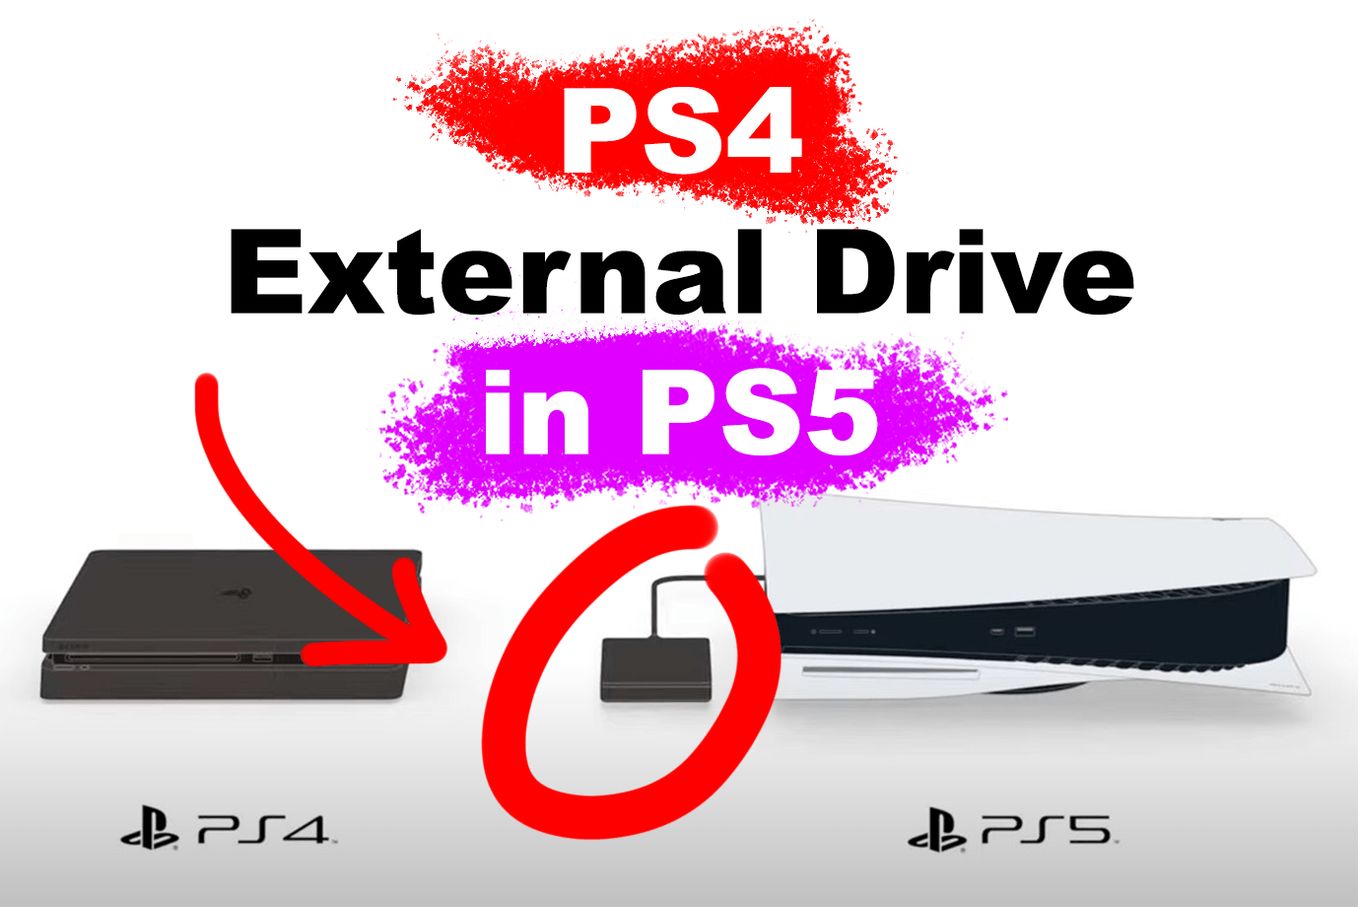 pension klatre ligegyldighed Will My PS4 External Hard Drive Work On PS5? [Full Explanation]